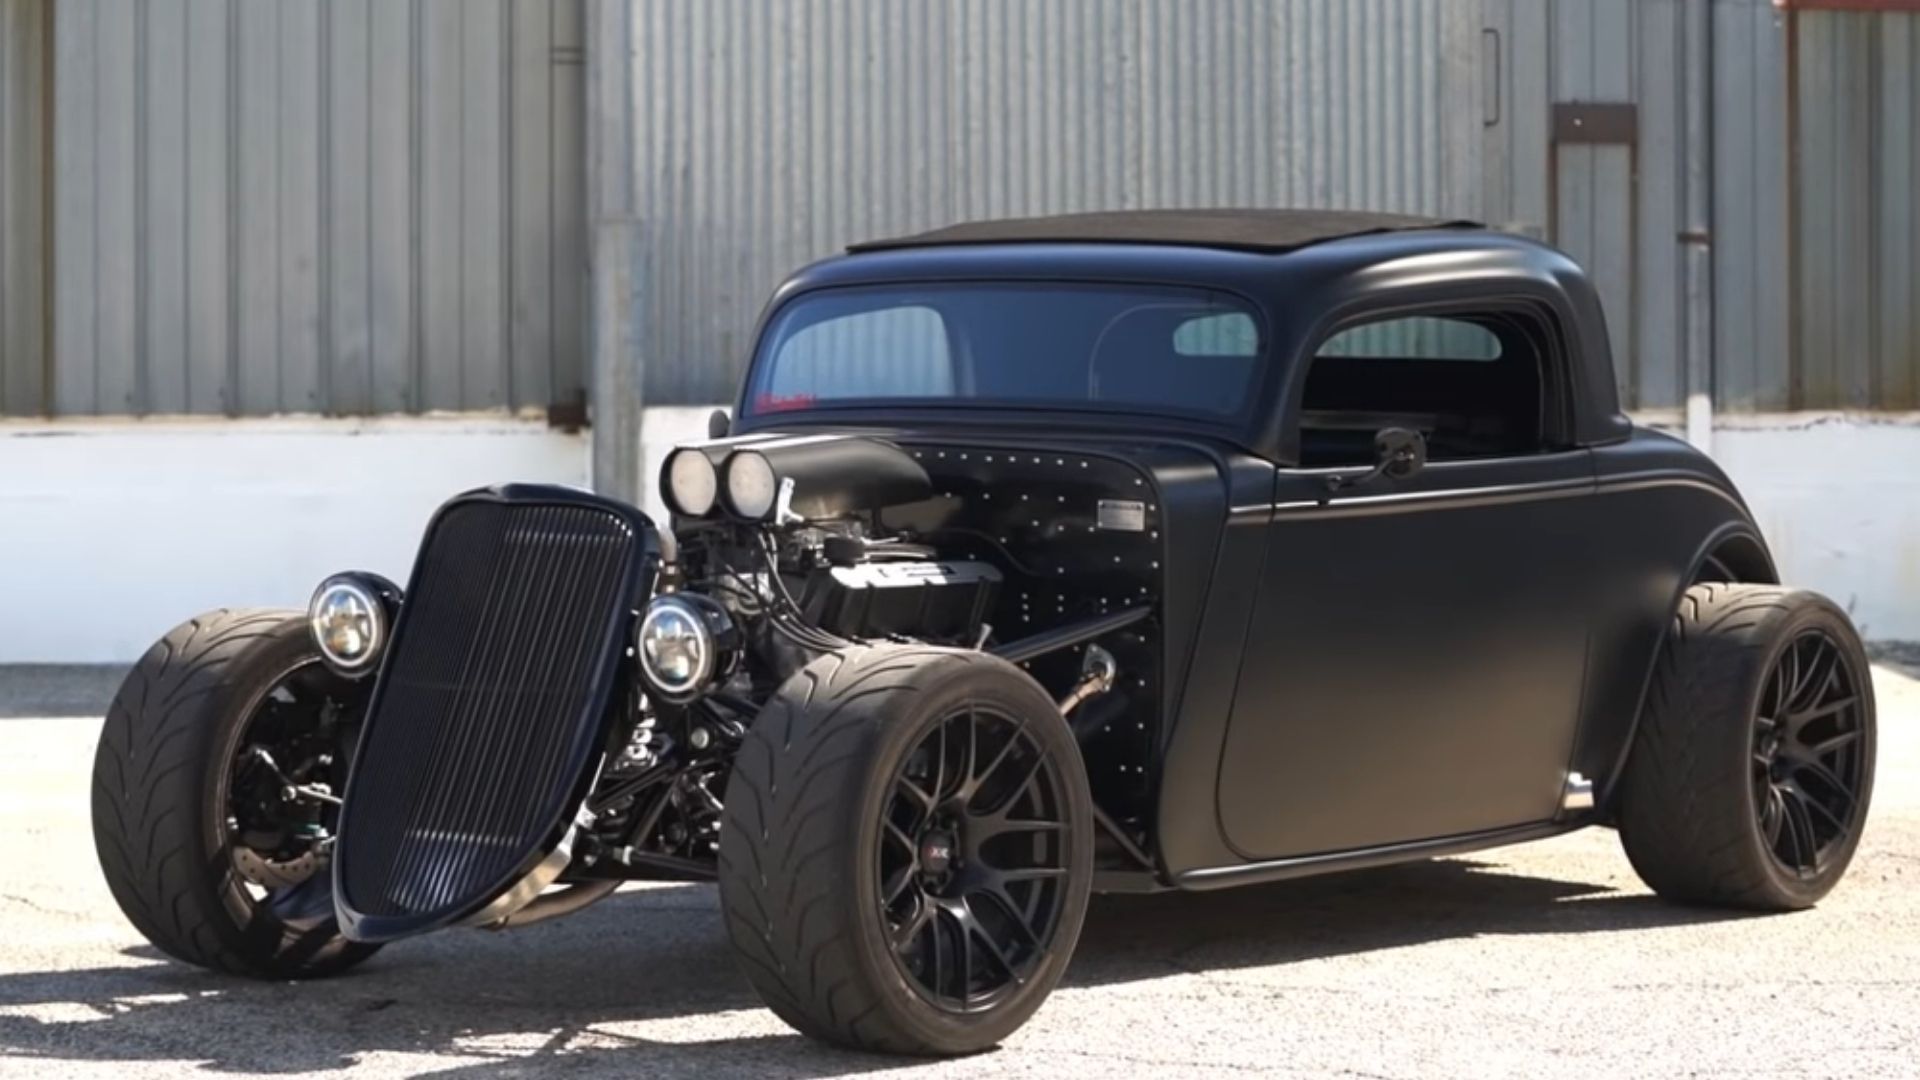 Factory Five '33 Ford Hot Rod Proves Kit Cars Can Kill It.